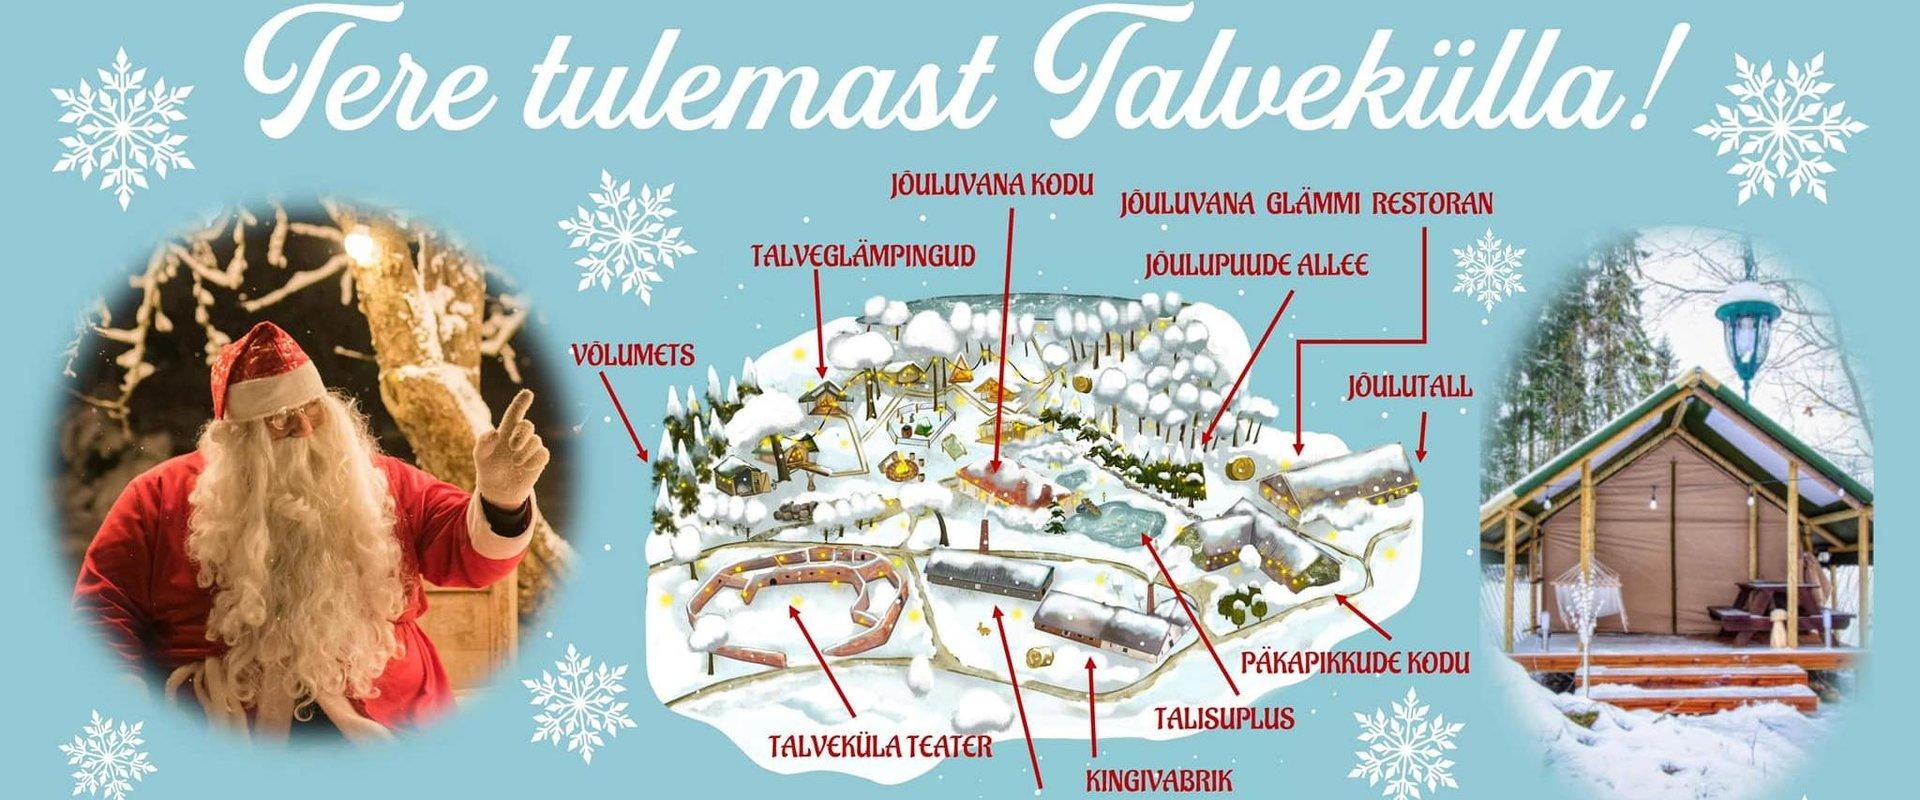 At the beginning of wintertime, the whole winter village becomes a Christmas wonderland. Santas brother Glämmi lives with elves and other characters i